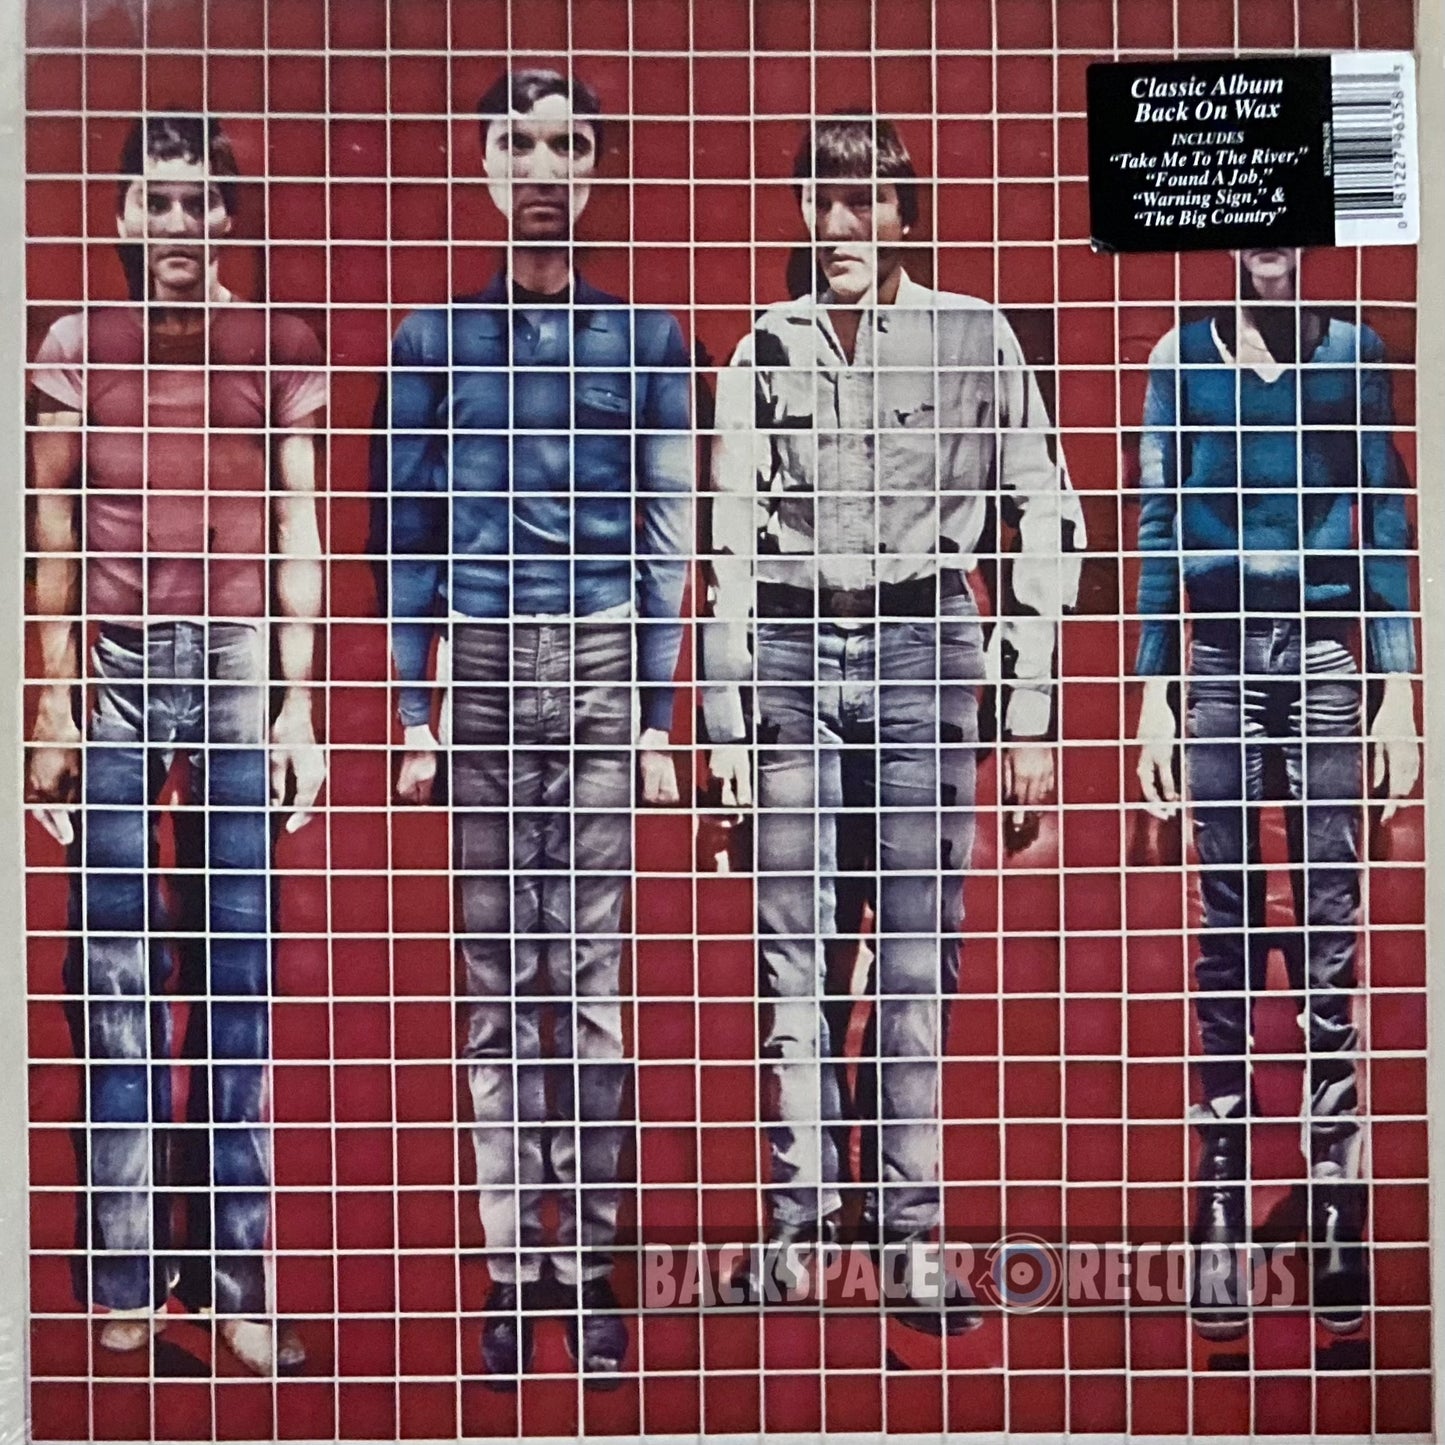 Talking Heads – More Songs About Buildings And Food LP (Sealed)